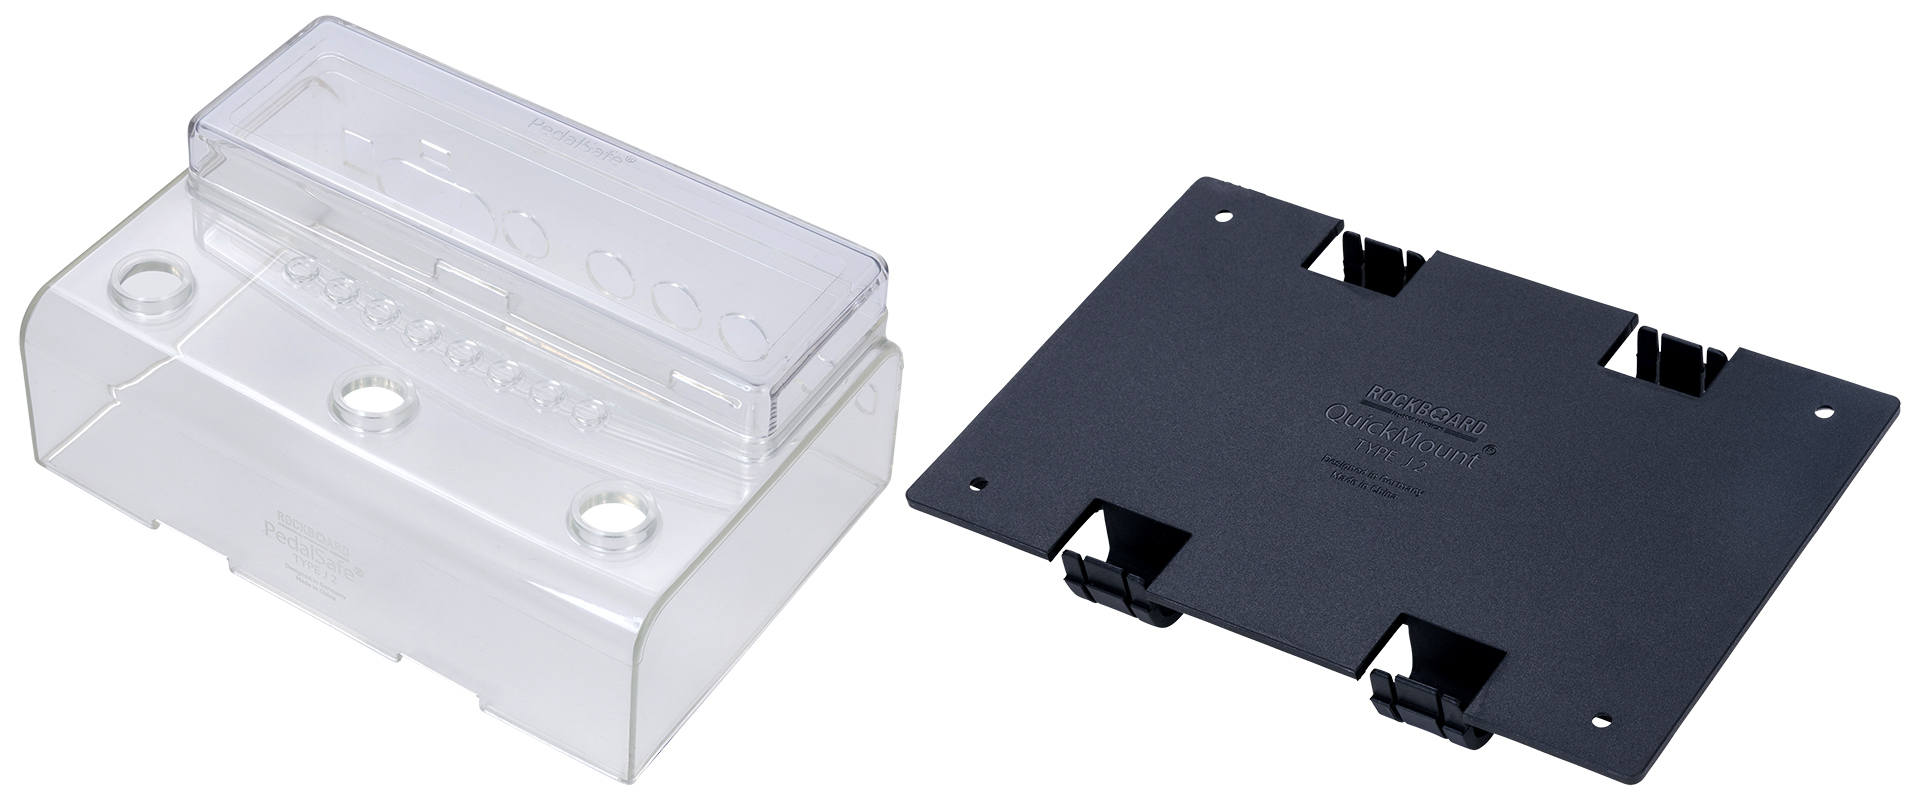 RockBoard PedalSafe Type J2 - Protective Cover and Rockboard Mounting Plate for STRYMON NightSky, Volante pedals